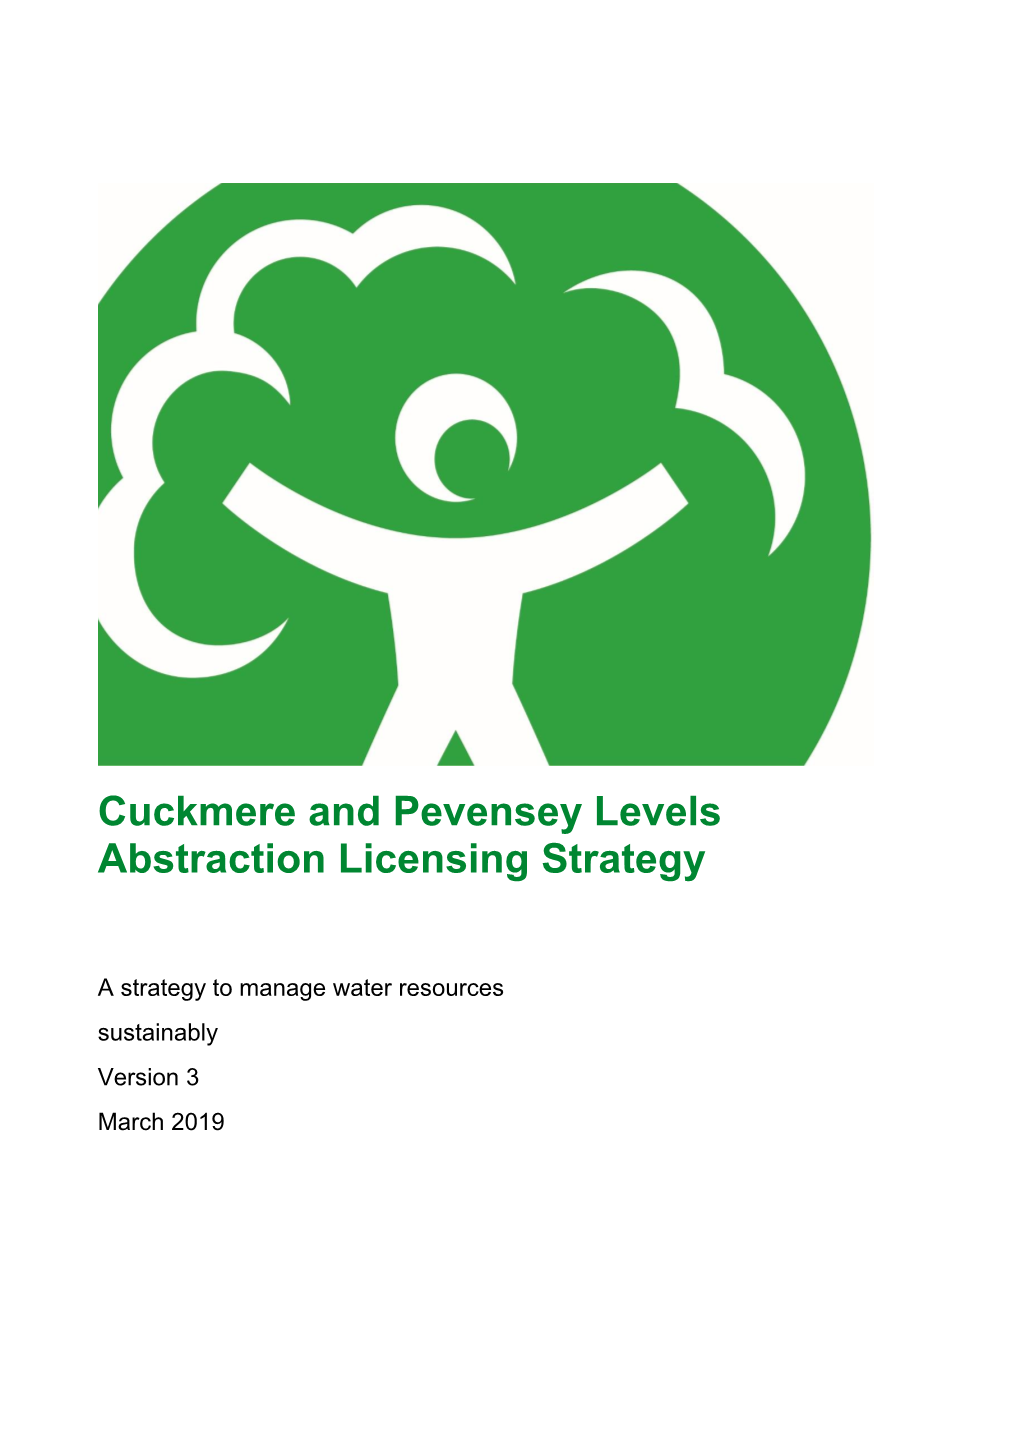 Cuckmere and Pevensey Levels Abstraction Licensing Strategy